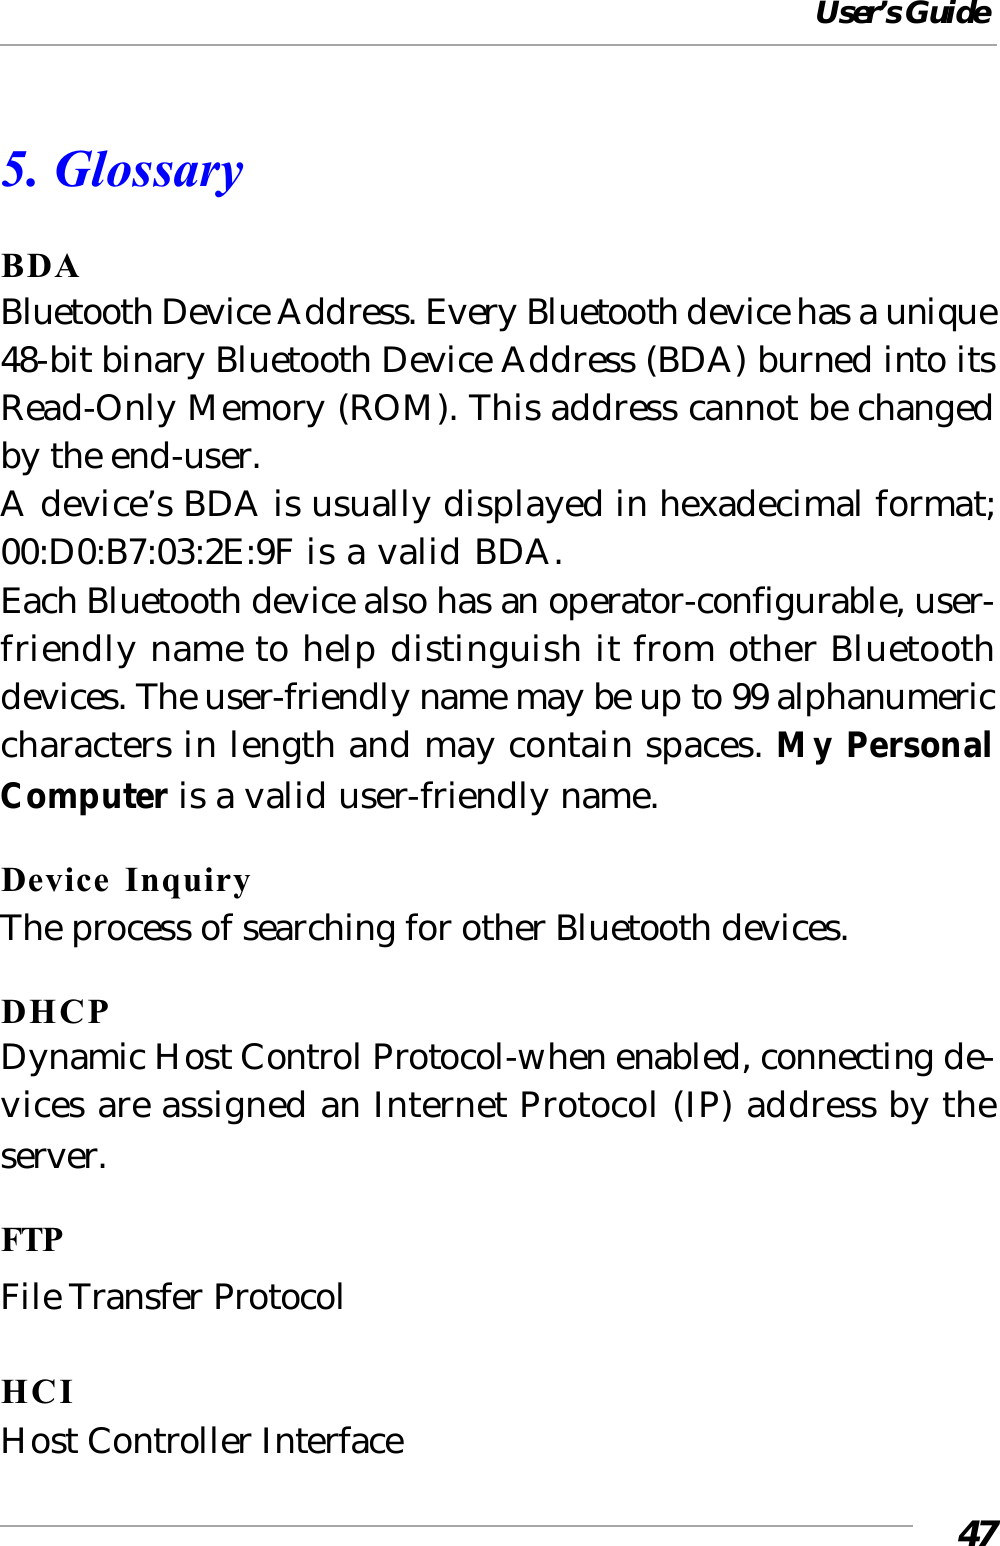 User’s Guide475. GlossaryBDABluetooth Device Address. Every Bluetooth device has a unique48-bit binary Bluetooth Device Address (BDA) burned into itsRead-Only Memory (ROM). This address cannot be changedby the end-user.A device’s BDA is usually displayed in hexadecimal format;00:D0:B7:03:2E:9F is a valid BDA.Each Bluetooth device also has an operator-configurable, user-friendly name to help distinguish it from other Bluetoothdevices. The user-friendly name may be up to 99 alphanumericcharacters in length and may contain spaces. My PersonalComputer is a valid user-friendly name.Device InquiryThe process of searching for other Bluetooth devices.DHCPDynamic Host Control Protocol-when enabled, connecting de-vices are assigned an Internet Protocol (IP) address by theserver.FTPFile Transfer ProtocolHCIHost Controller Interface